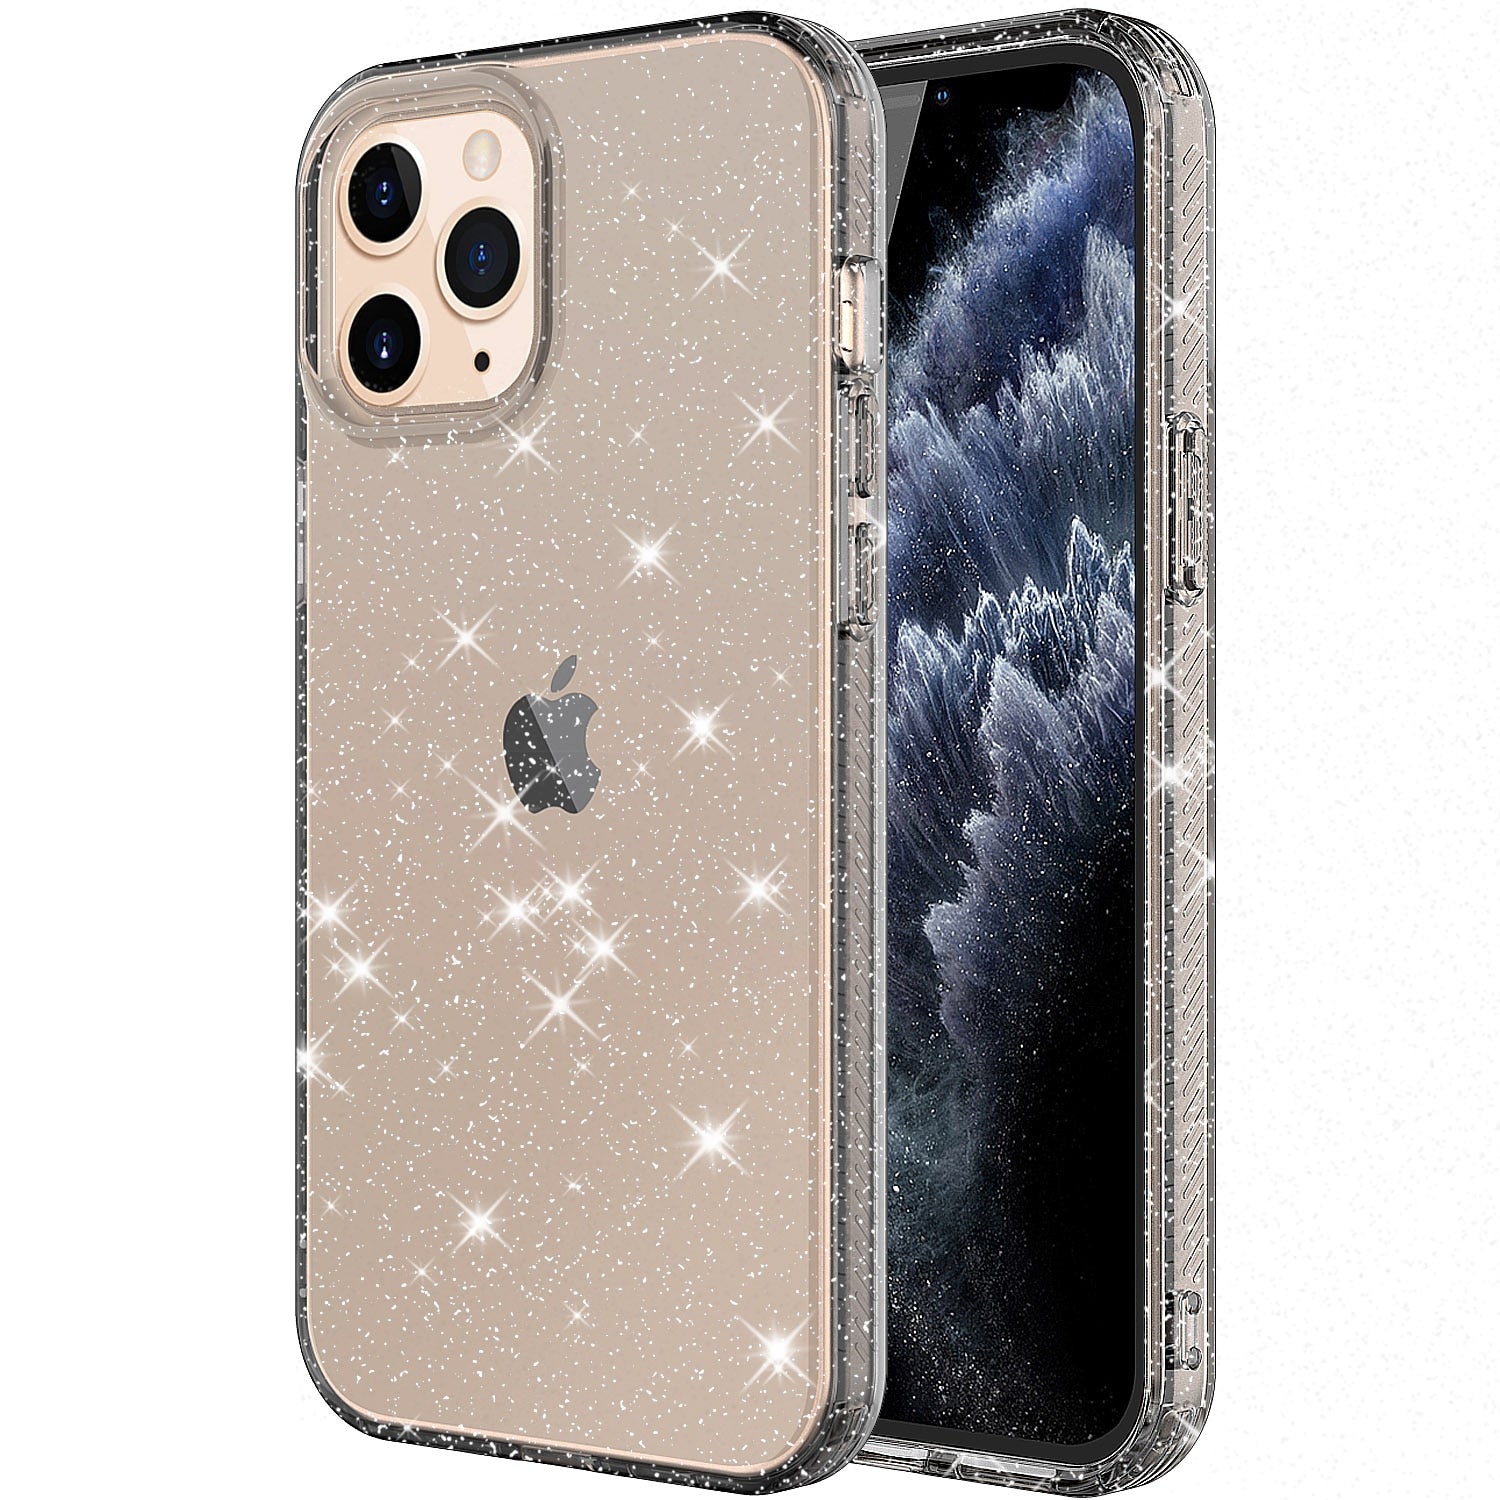 Glitter Case For Apple iPhone 12 Mini Case iPhone 12 Pro Max 5G Cover Clear Matte Anti-fall for iPhone 12 Pro - 5G - 380230 for iPhone 12 Mini / Gray / United States Find Epic Store